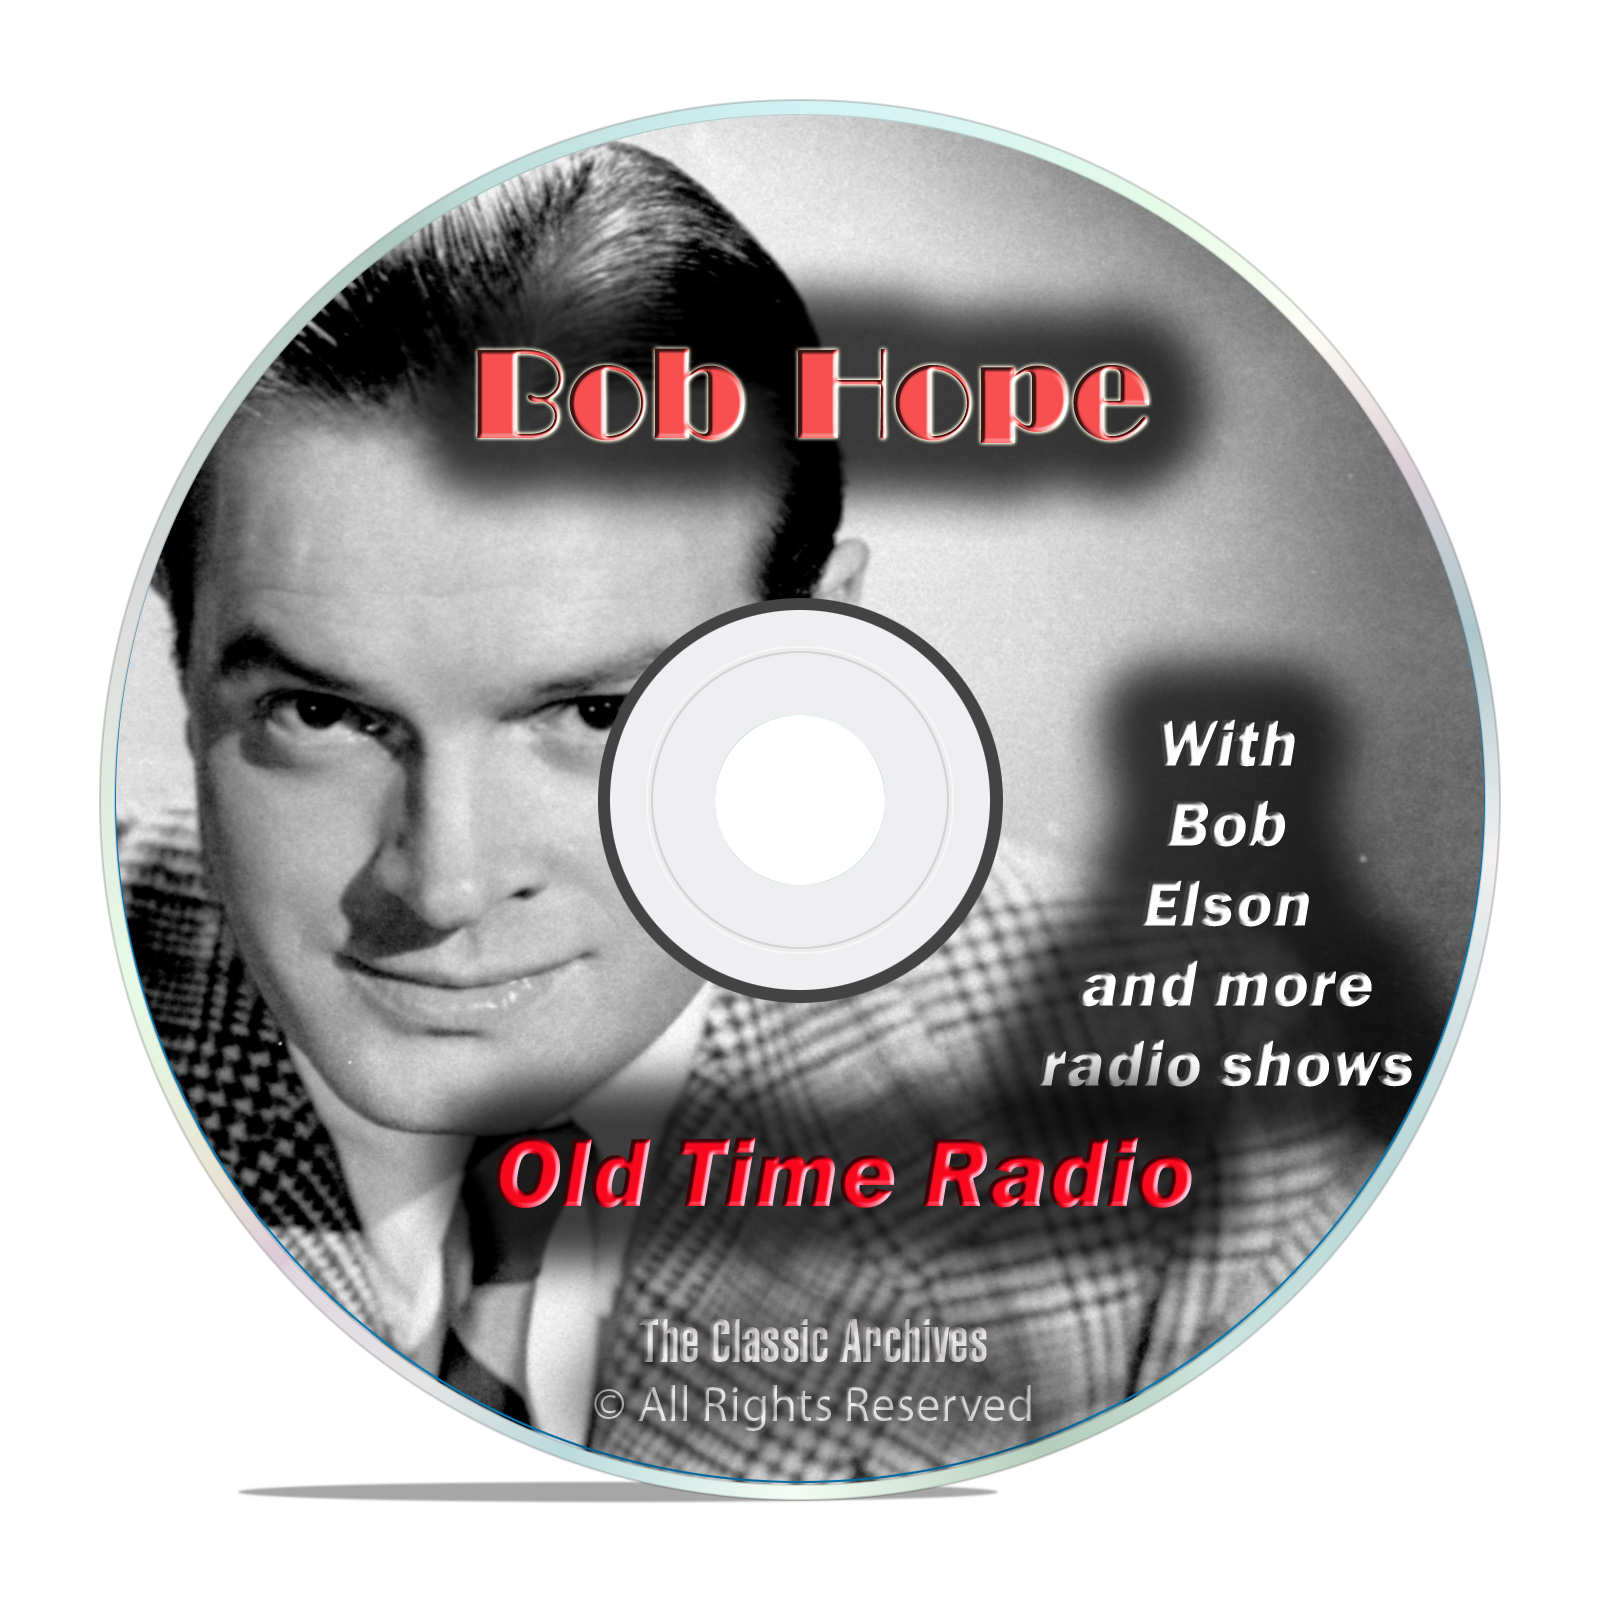 Bob Hope, Comedy, Music and Variety Shows, 849 Old Time Radio Shows, OTR